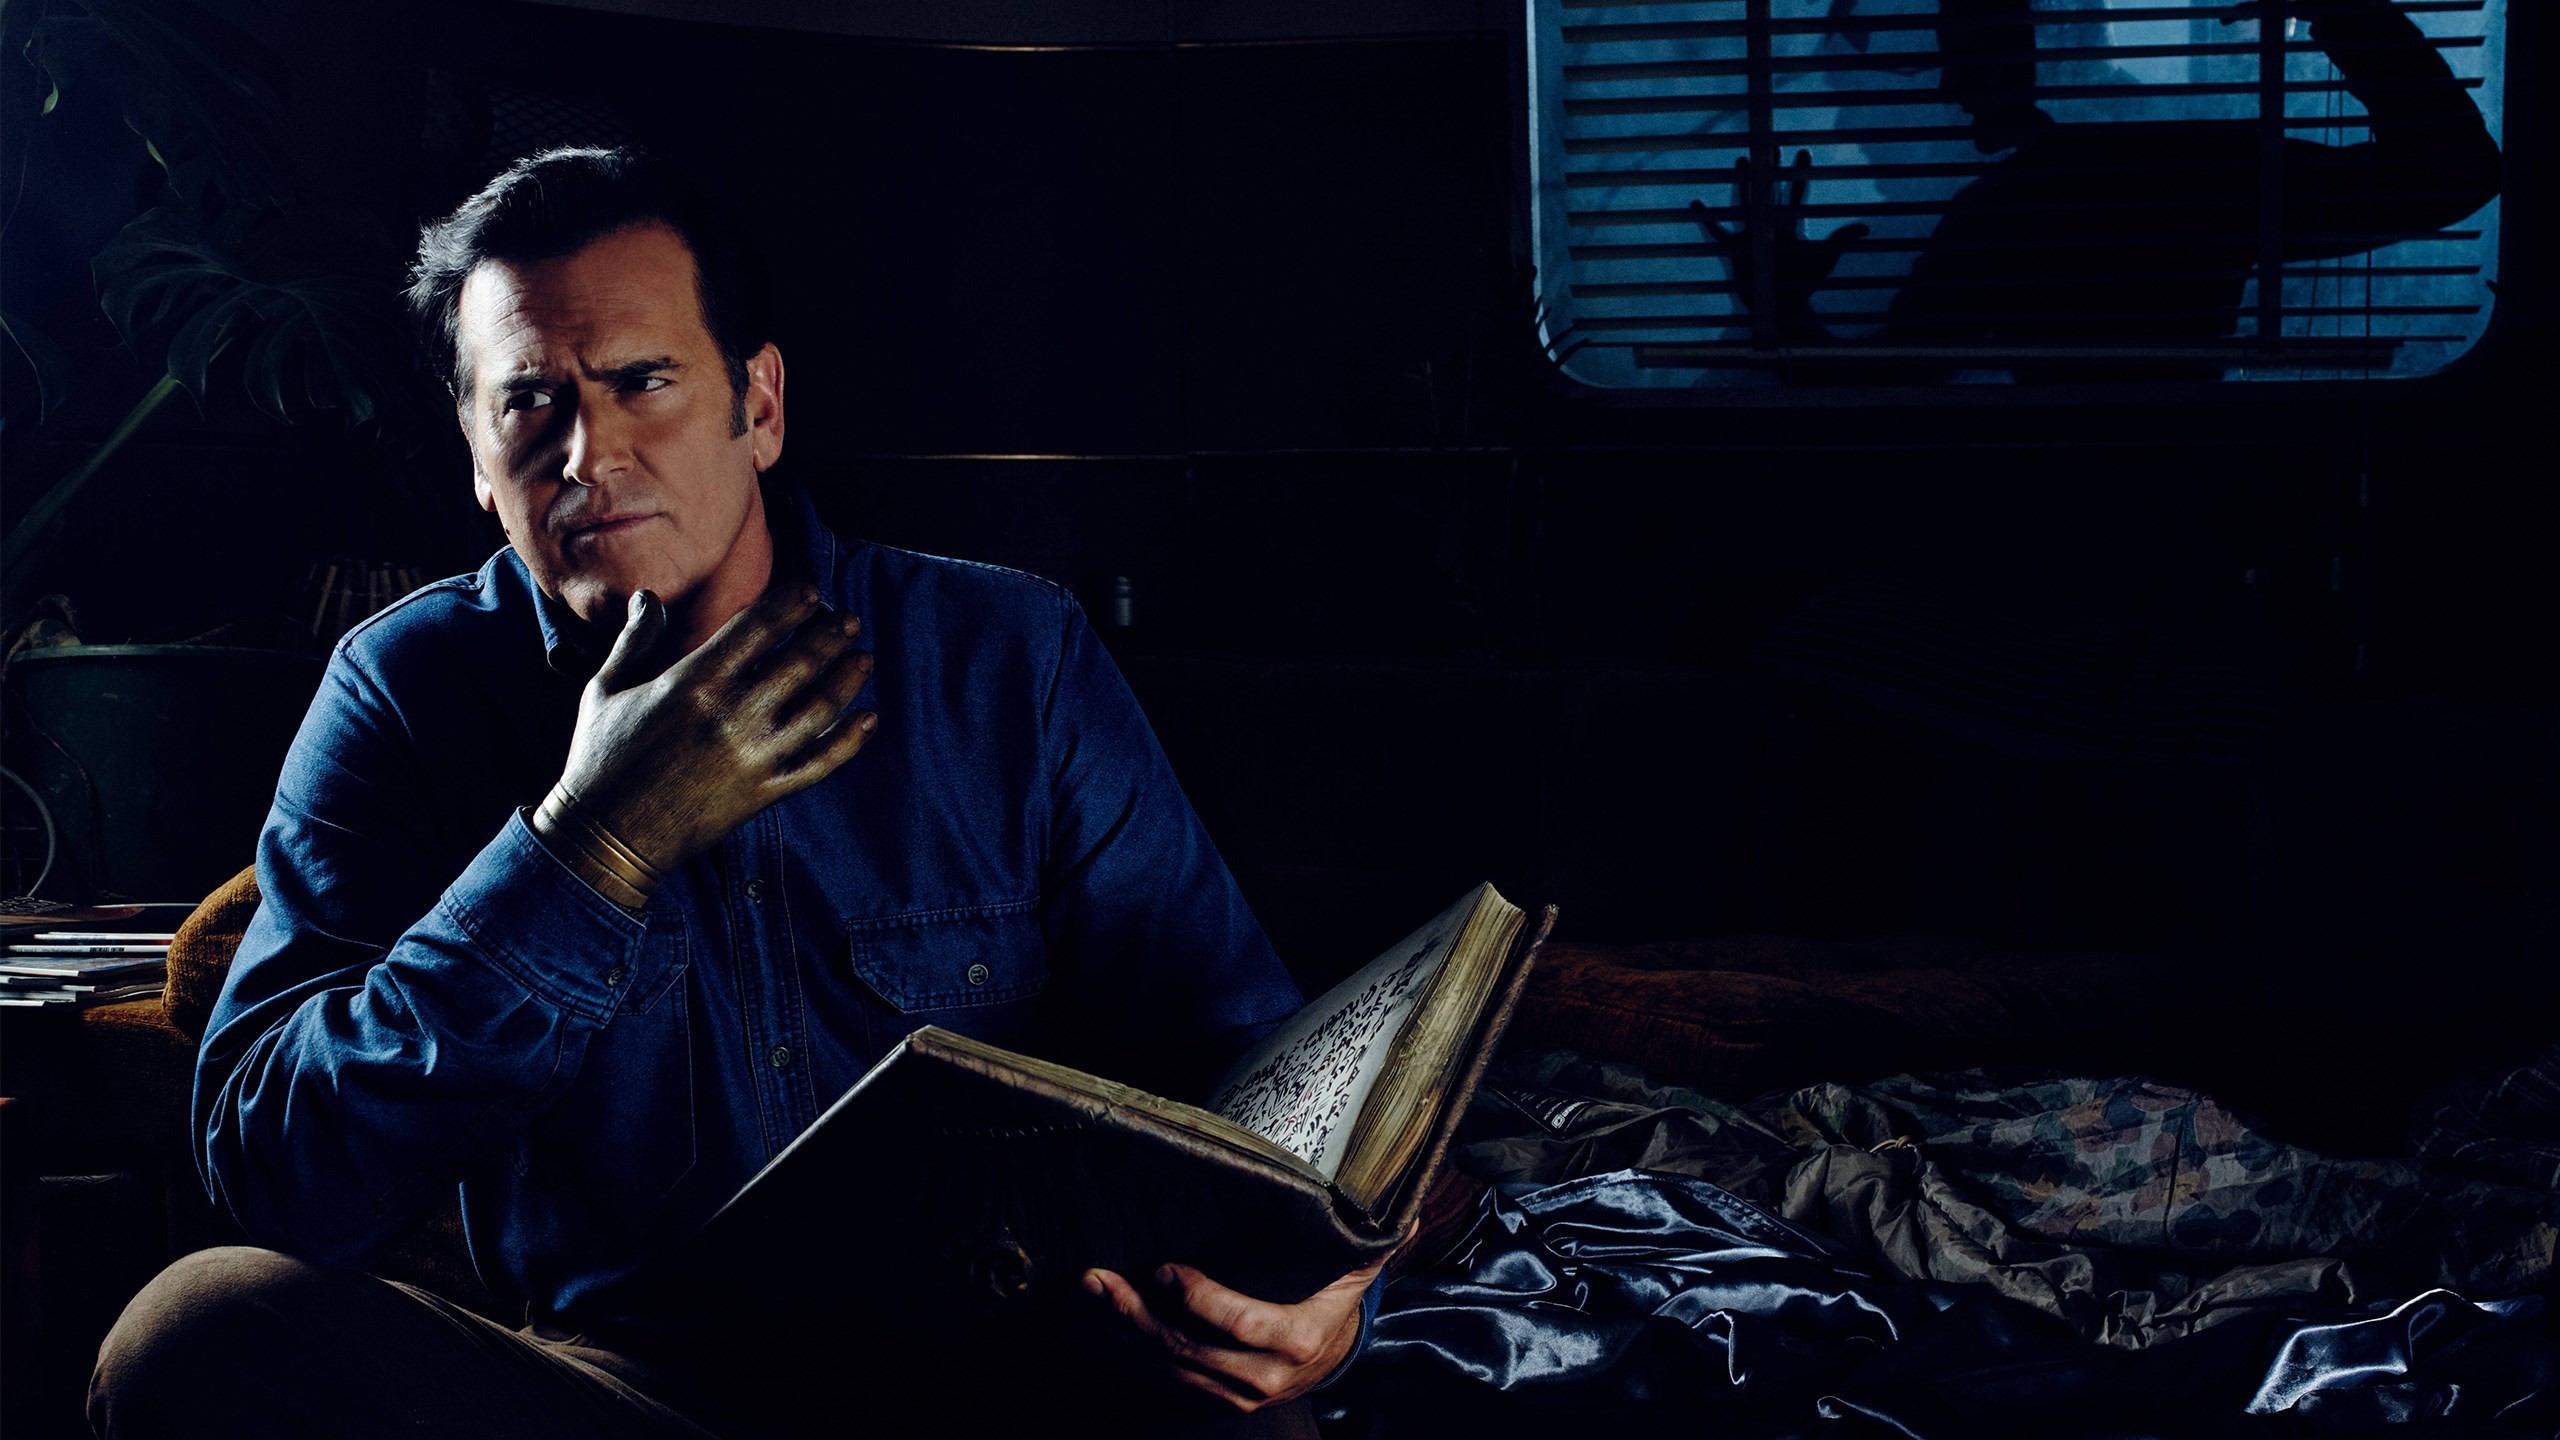 Ash vs. Evil Dead star Bruce Campbell says he's 'retired' from playing Ash